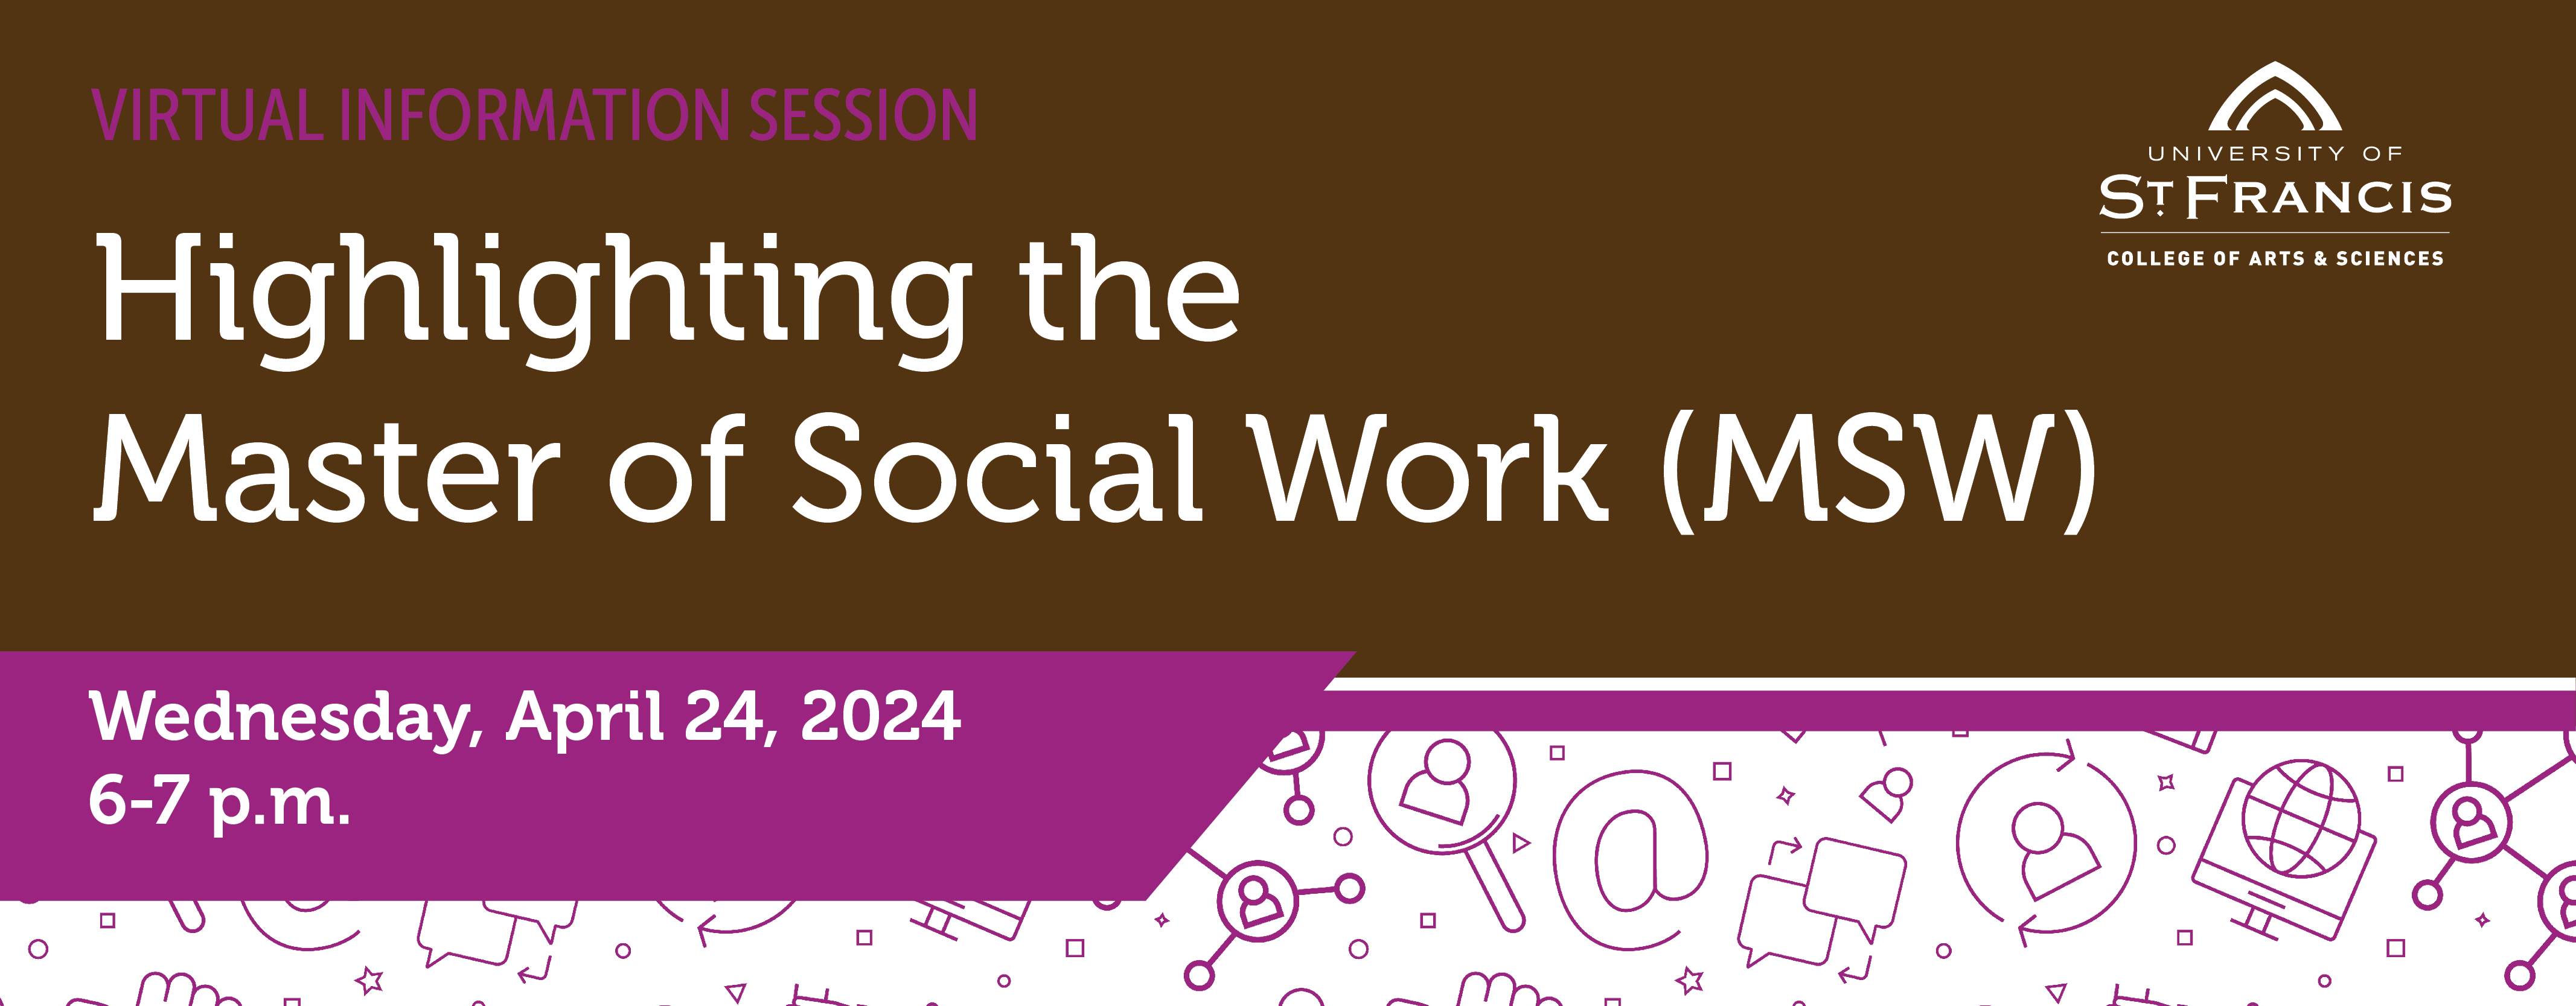 MSW Virtual Info Session announcement: Wednesday, April 24, 2024 from 6-7 p.m.